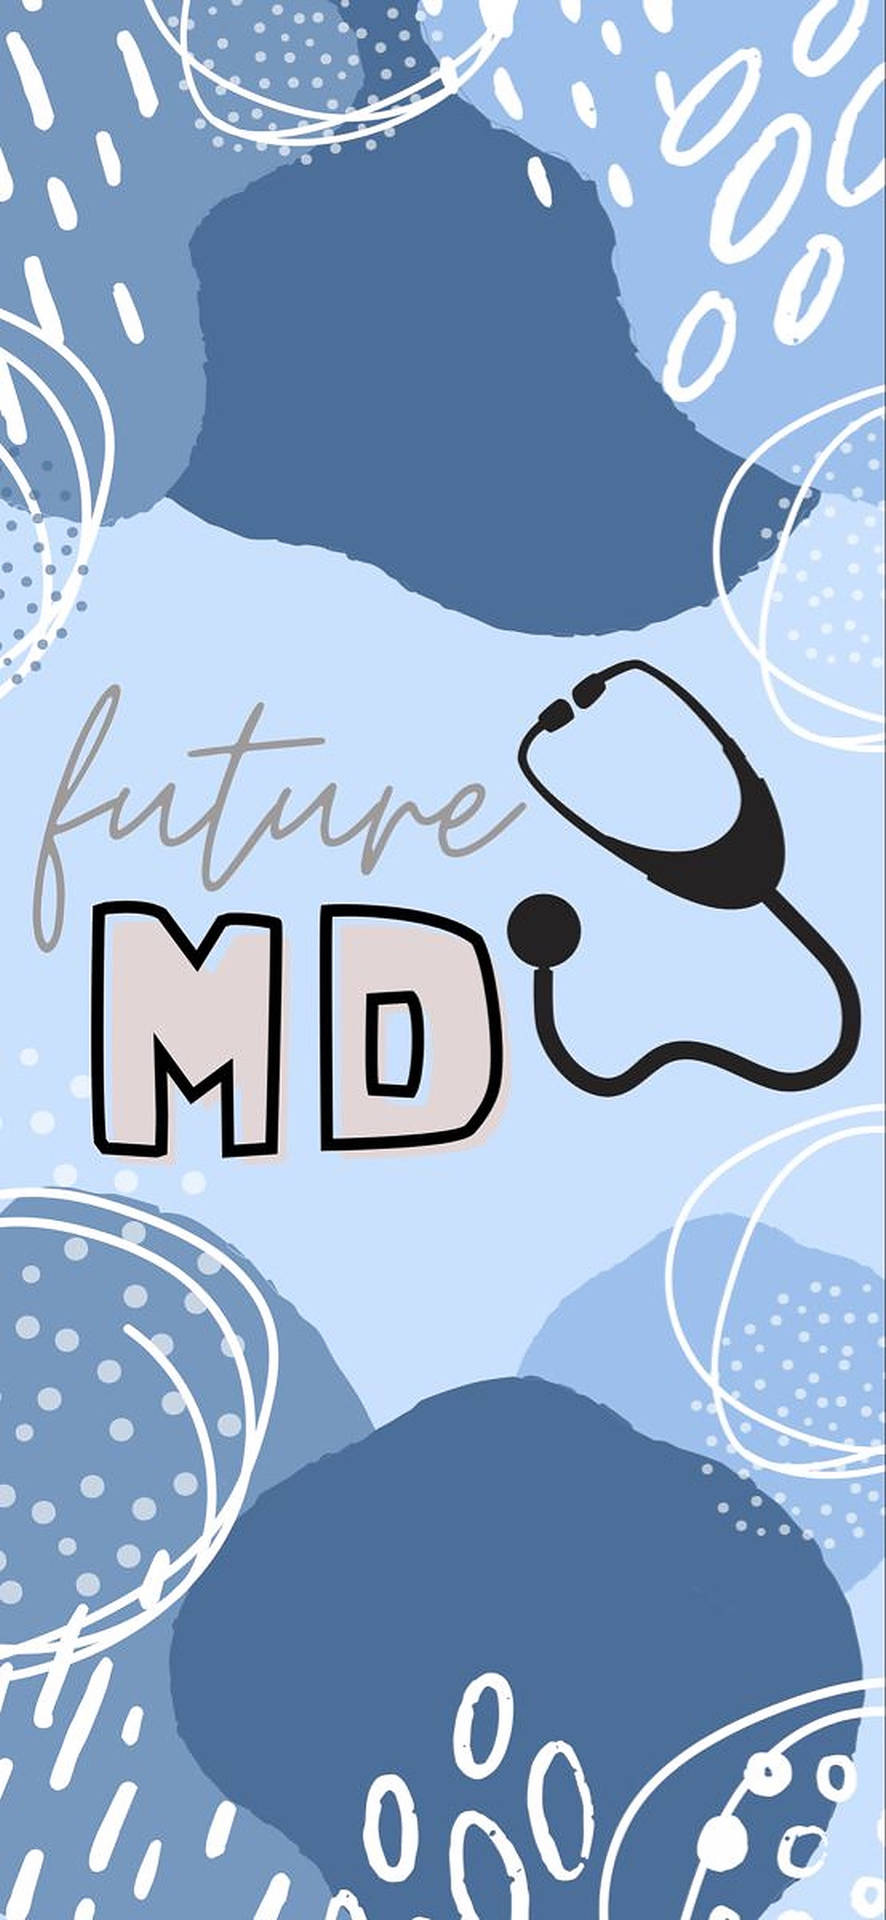 Future Md Doctor Background